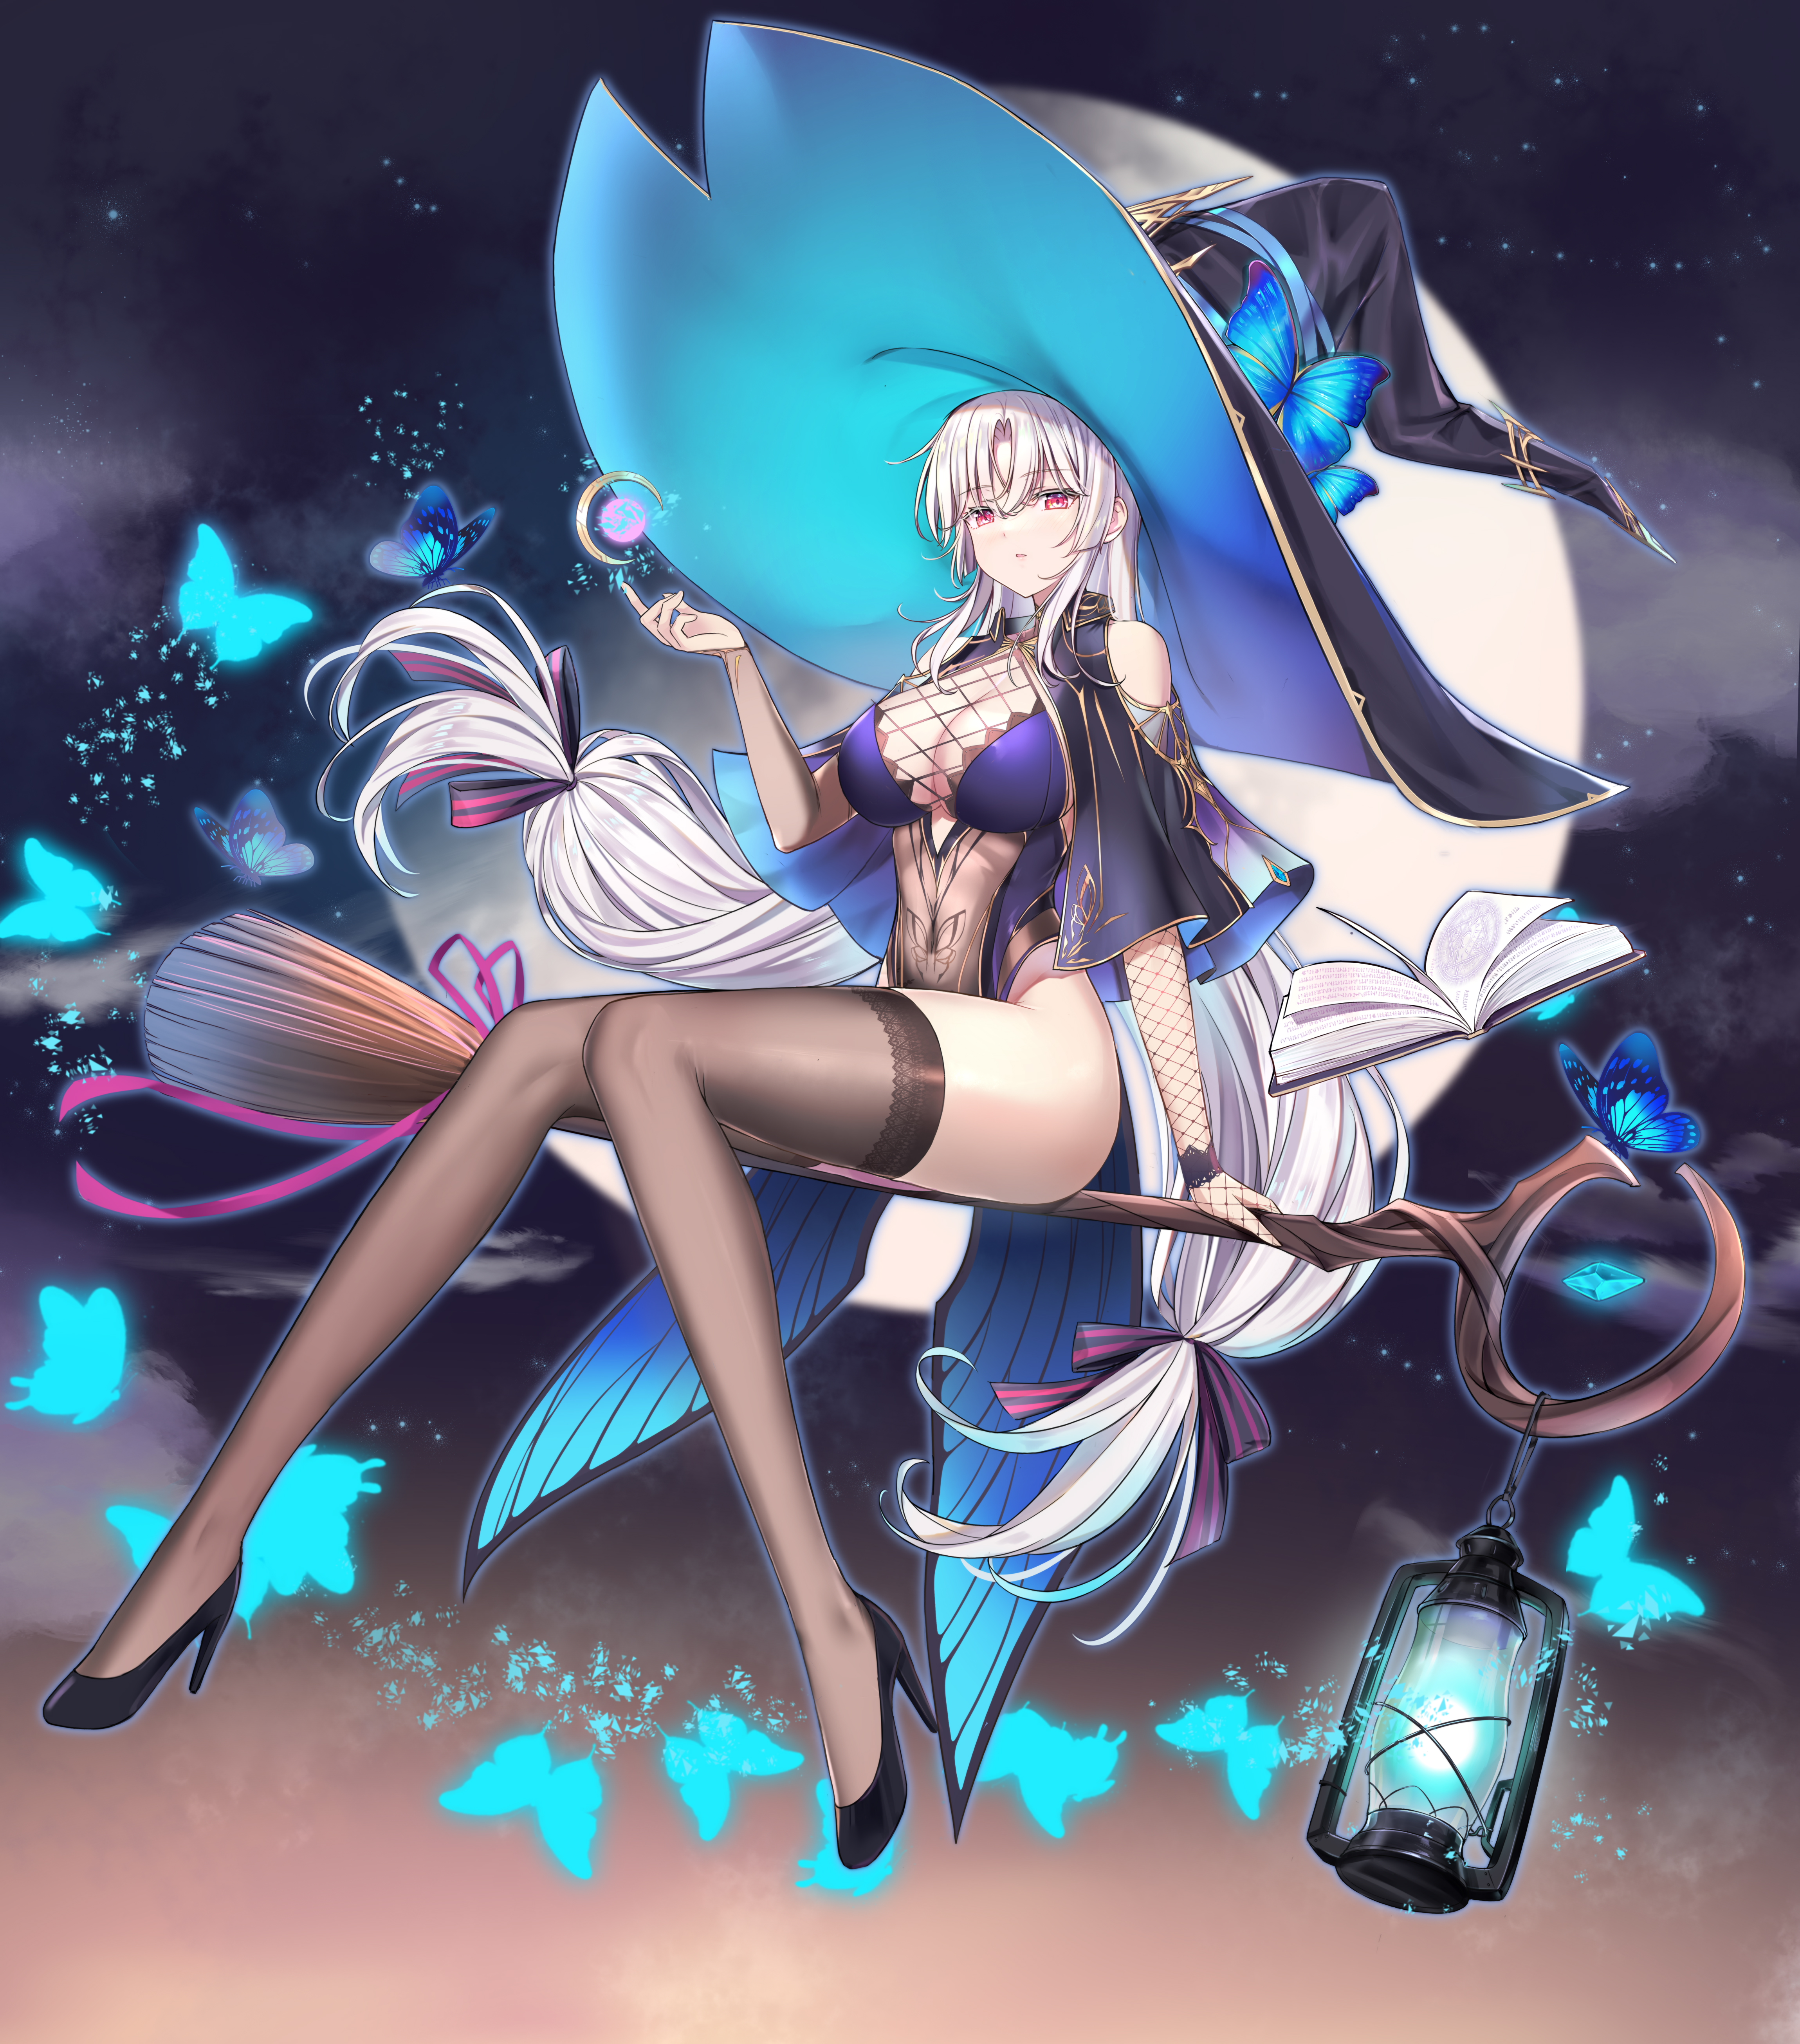 Anime 4598x5220 Shenyuekong butterfly portrait display witch anime girls witch hat full moon Moon sky long hair looking at viewer white hair big boobs womb tattoo stockings see-through clothing legs cleavage fishnet thighs witch's broom broom red eyes twintails open mouth black heels sparkles heels black stockings butterfly wings stars starred sky starry night night black high-heels high heels lantern books sitting spell